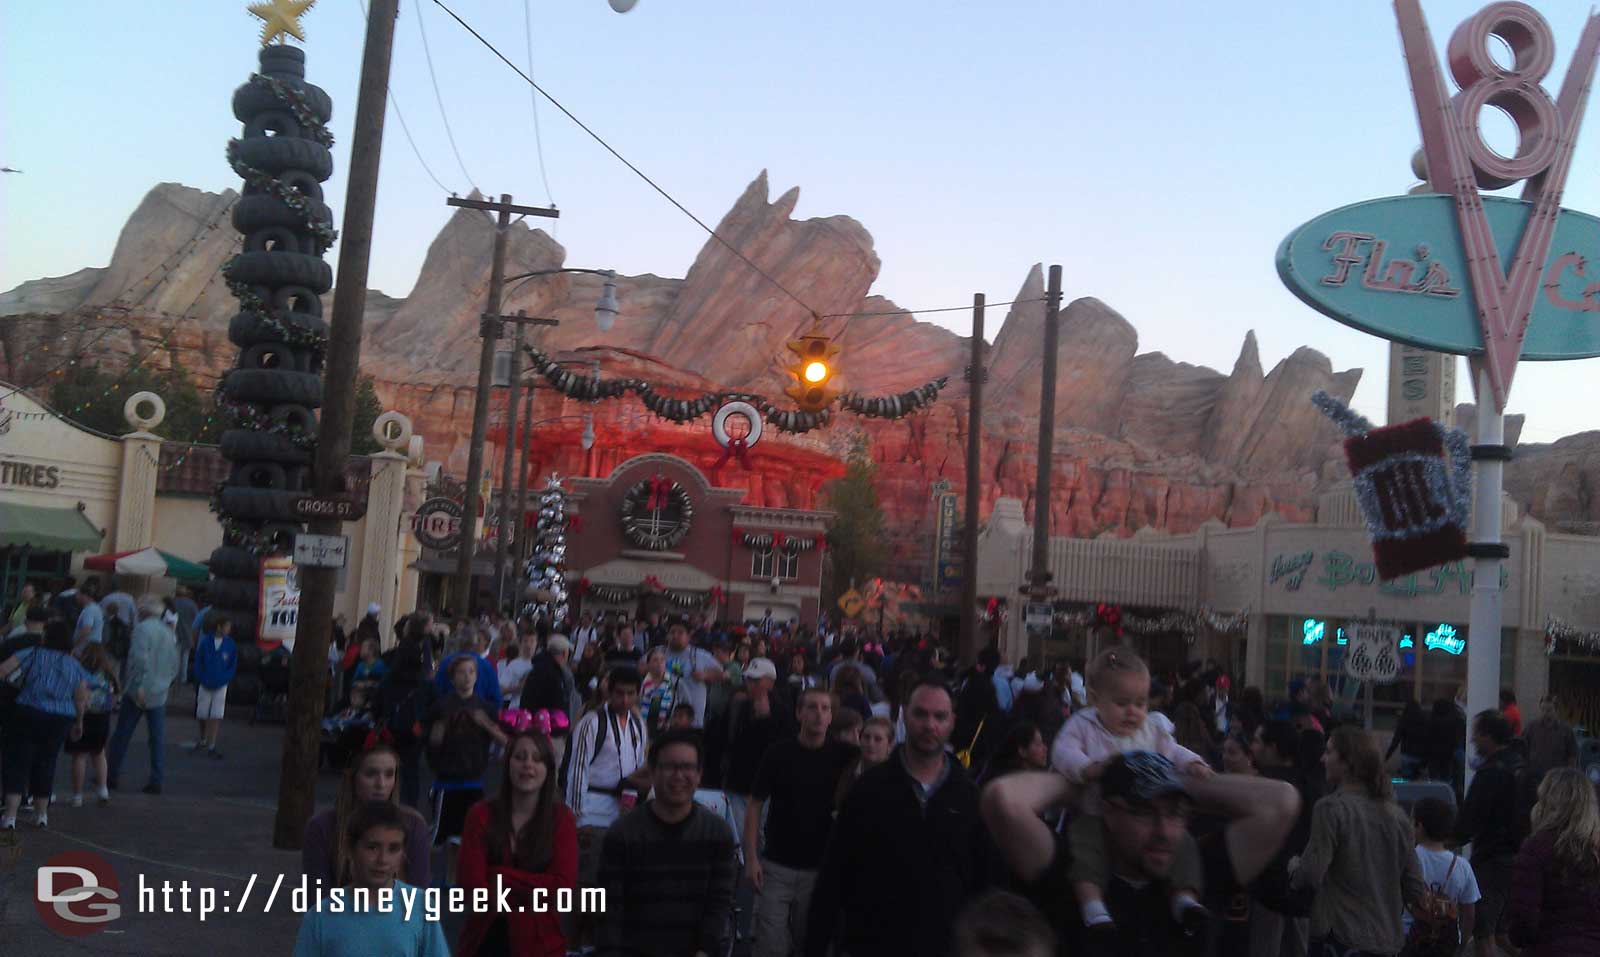 Hanging out on Route 66 in CarsLand waiting for the nightly lighting